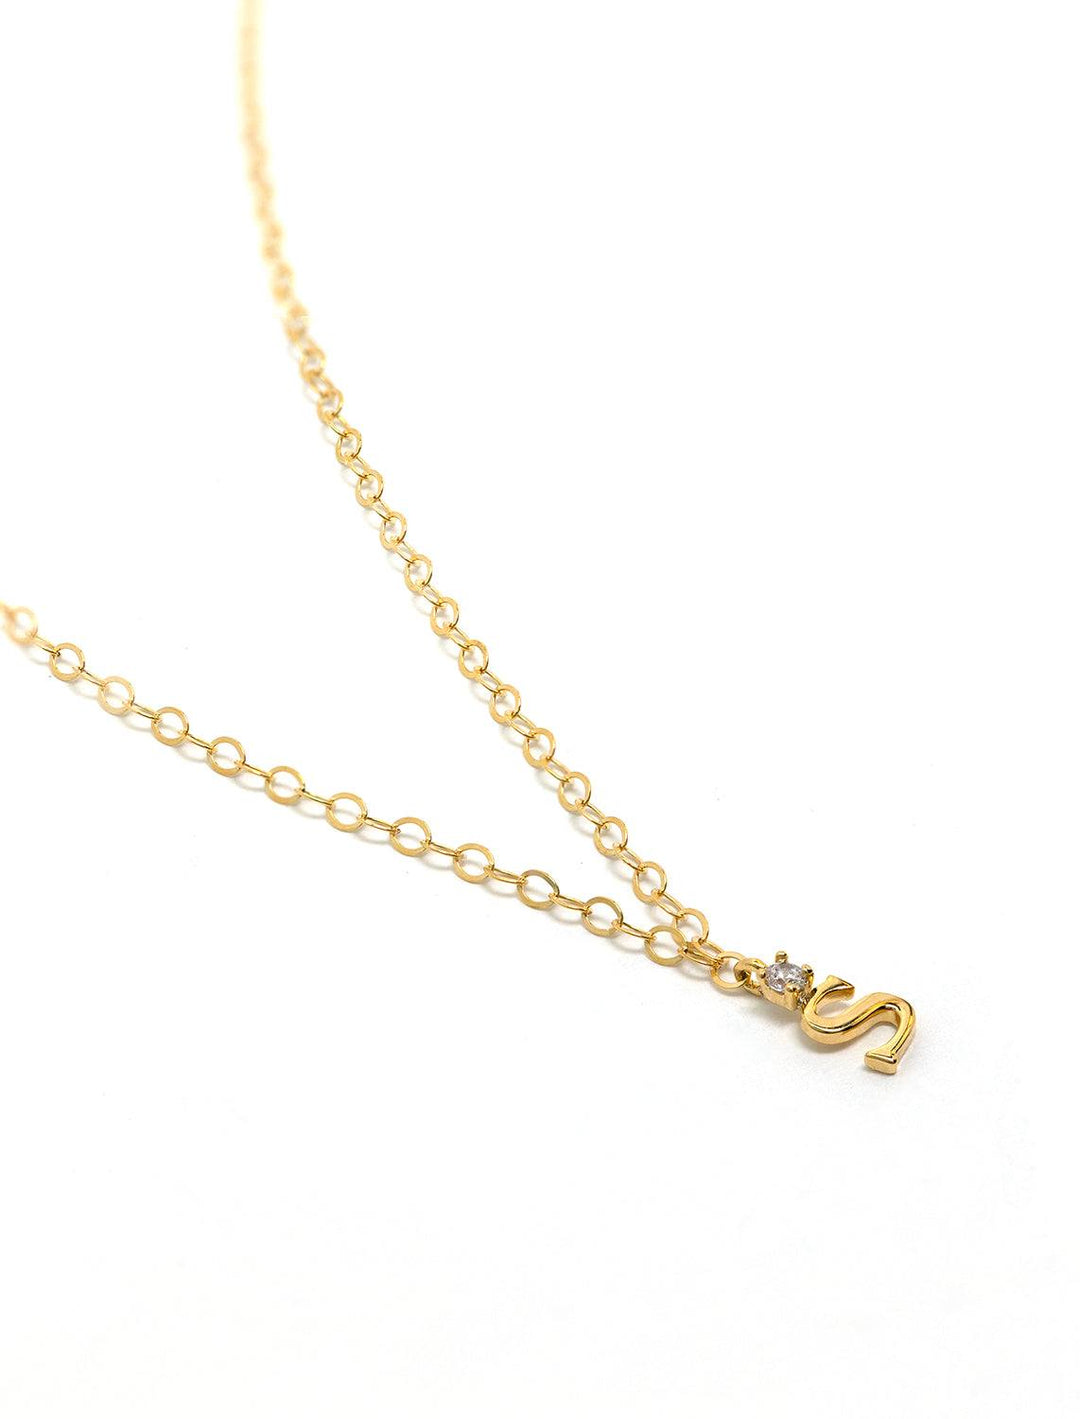 Marit Rae initial and cz necklace in gold | S - Twigs